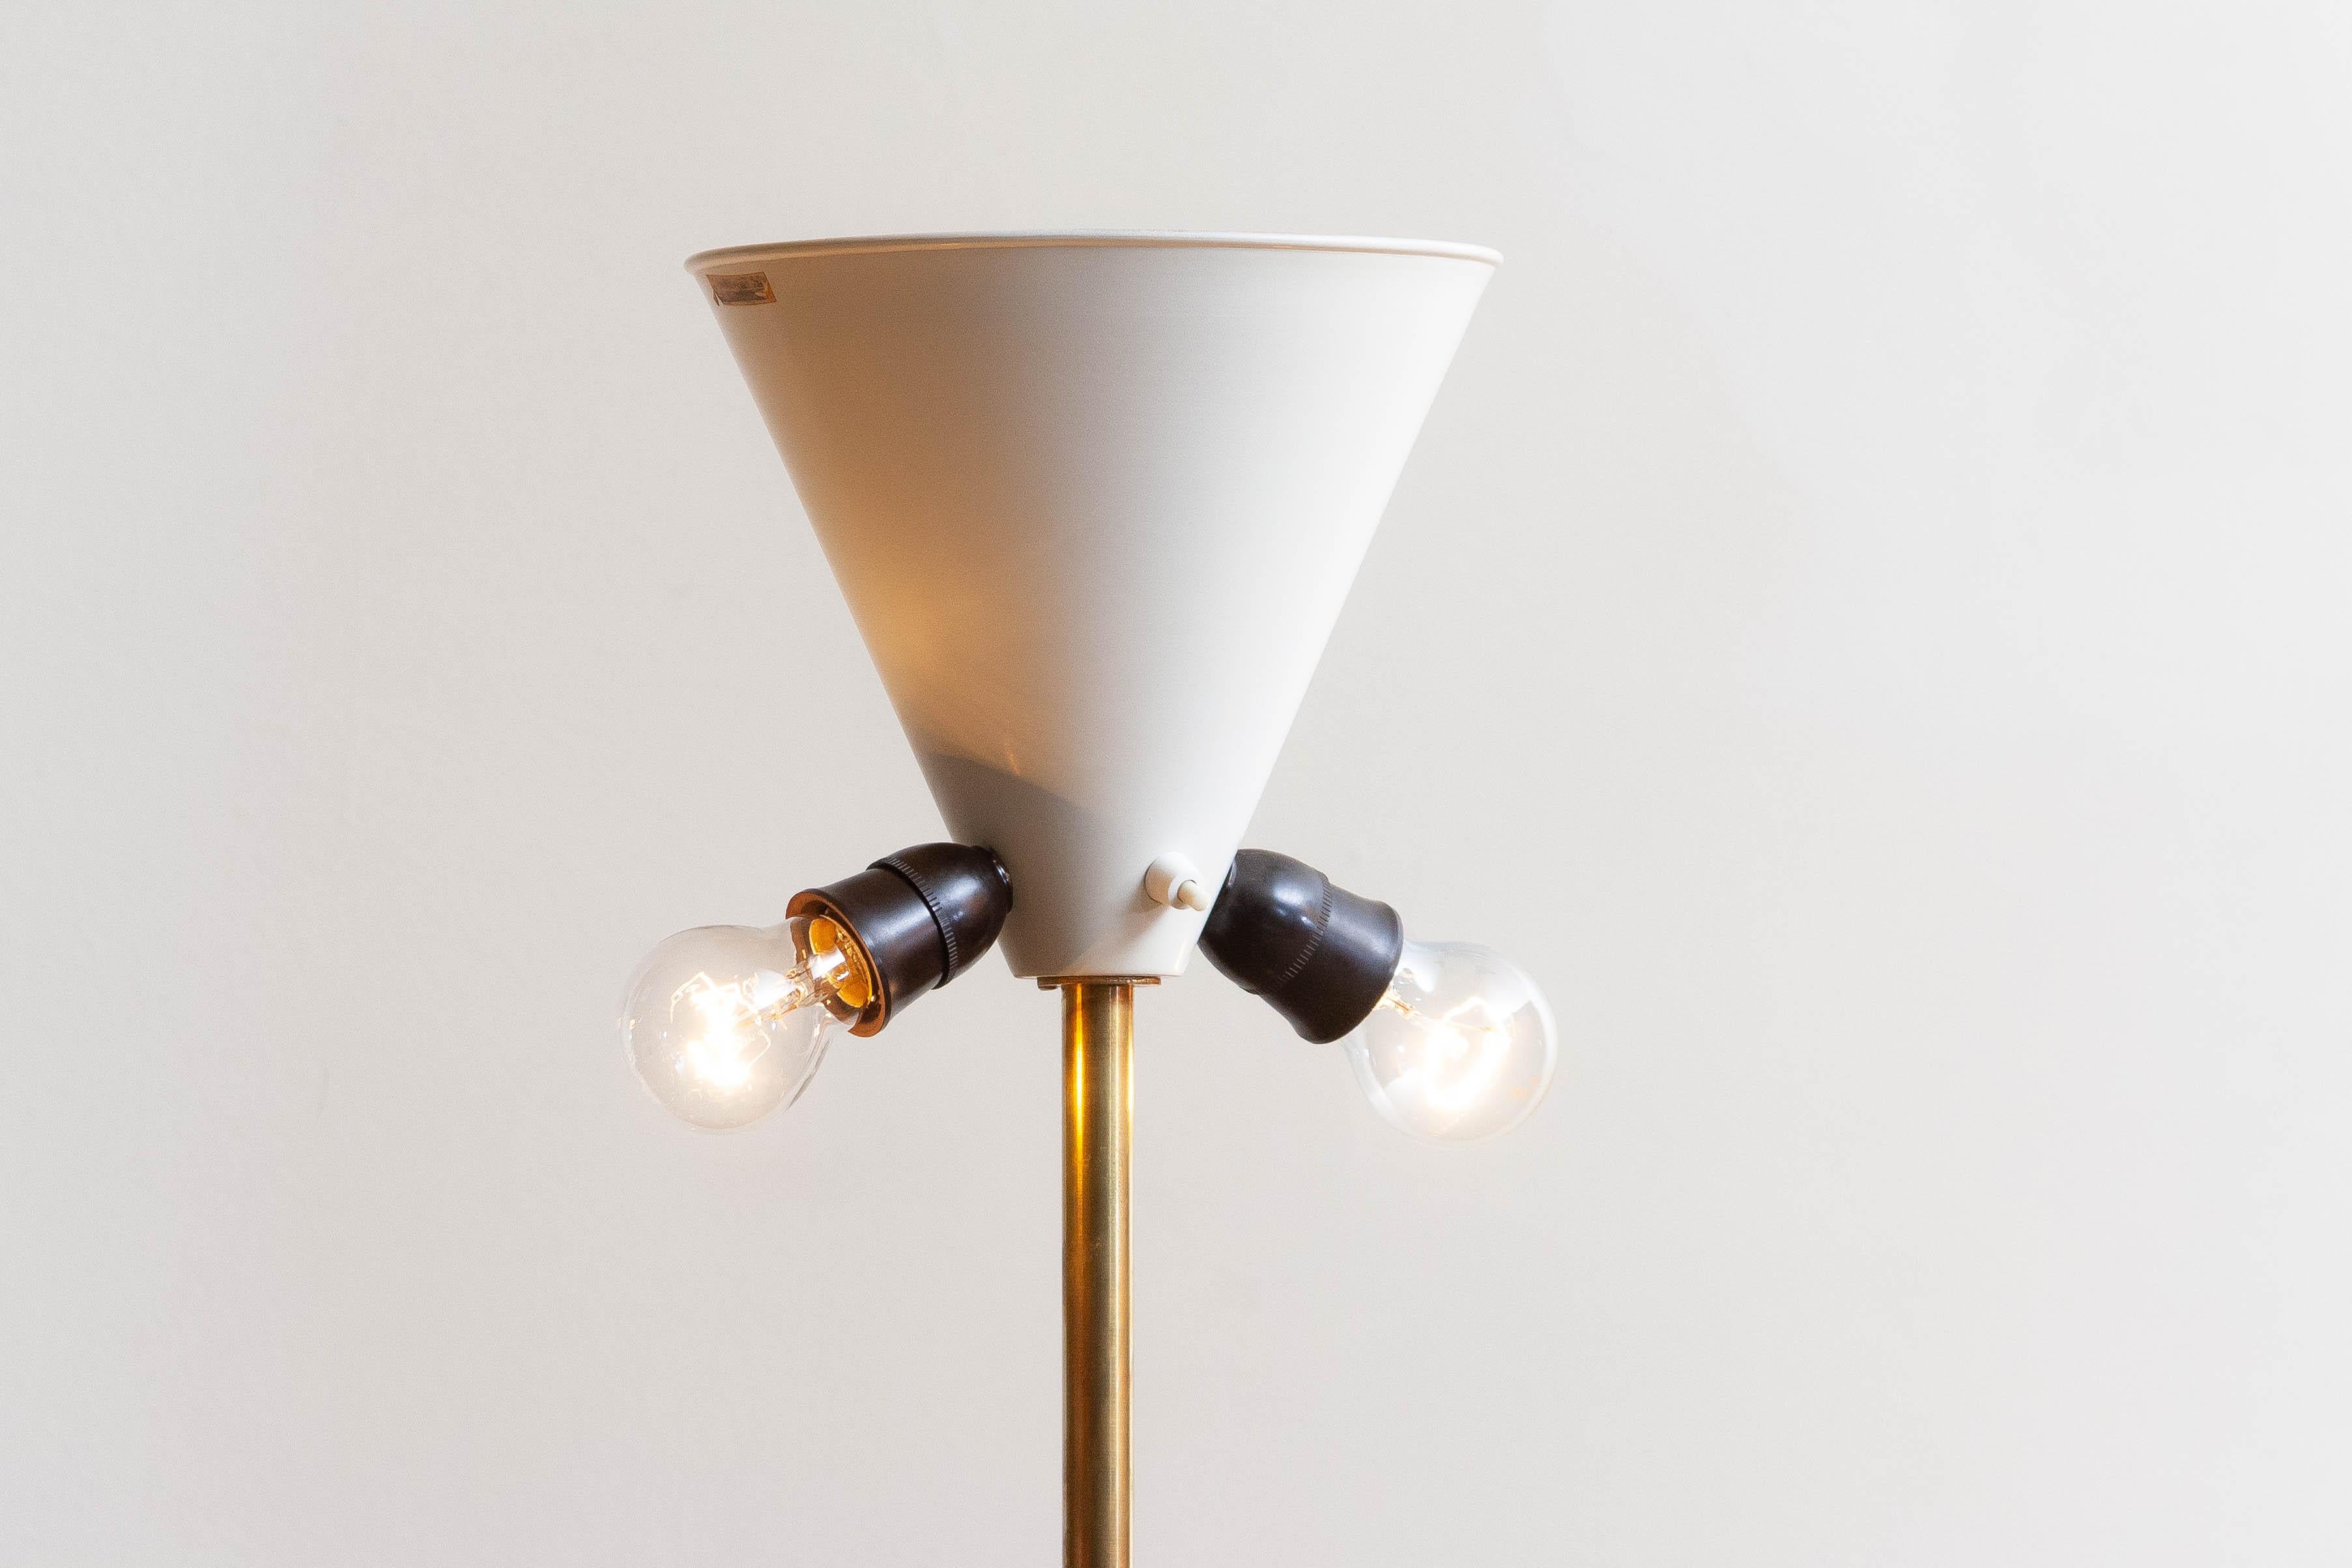 Mid-Century Modern 1950s, Up-Light Floor Lamp in Brass and Metal by Fagerhults Belysning, Sweden